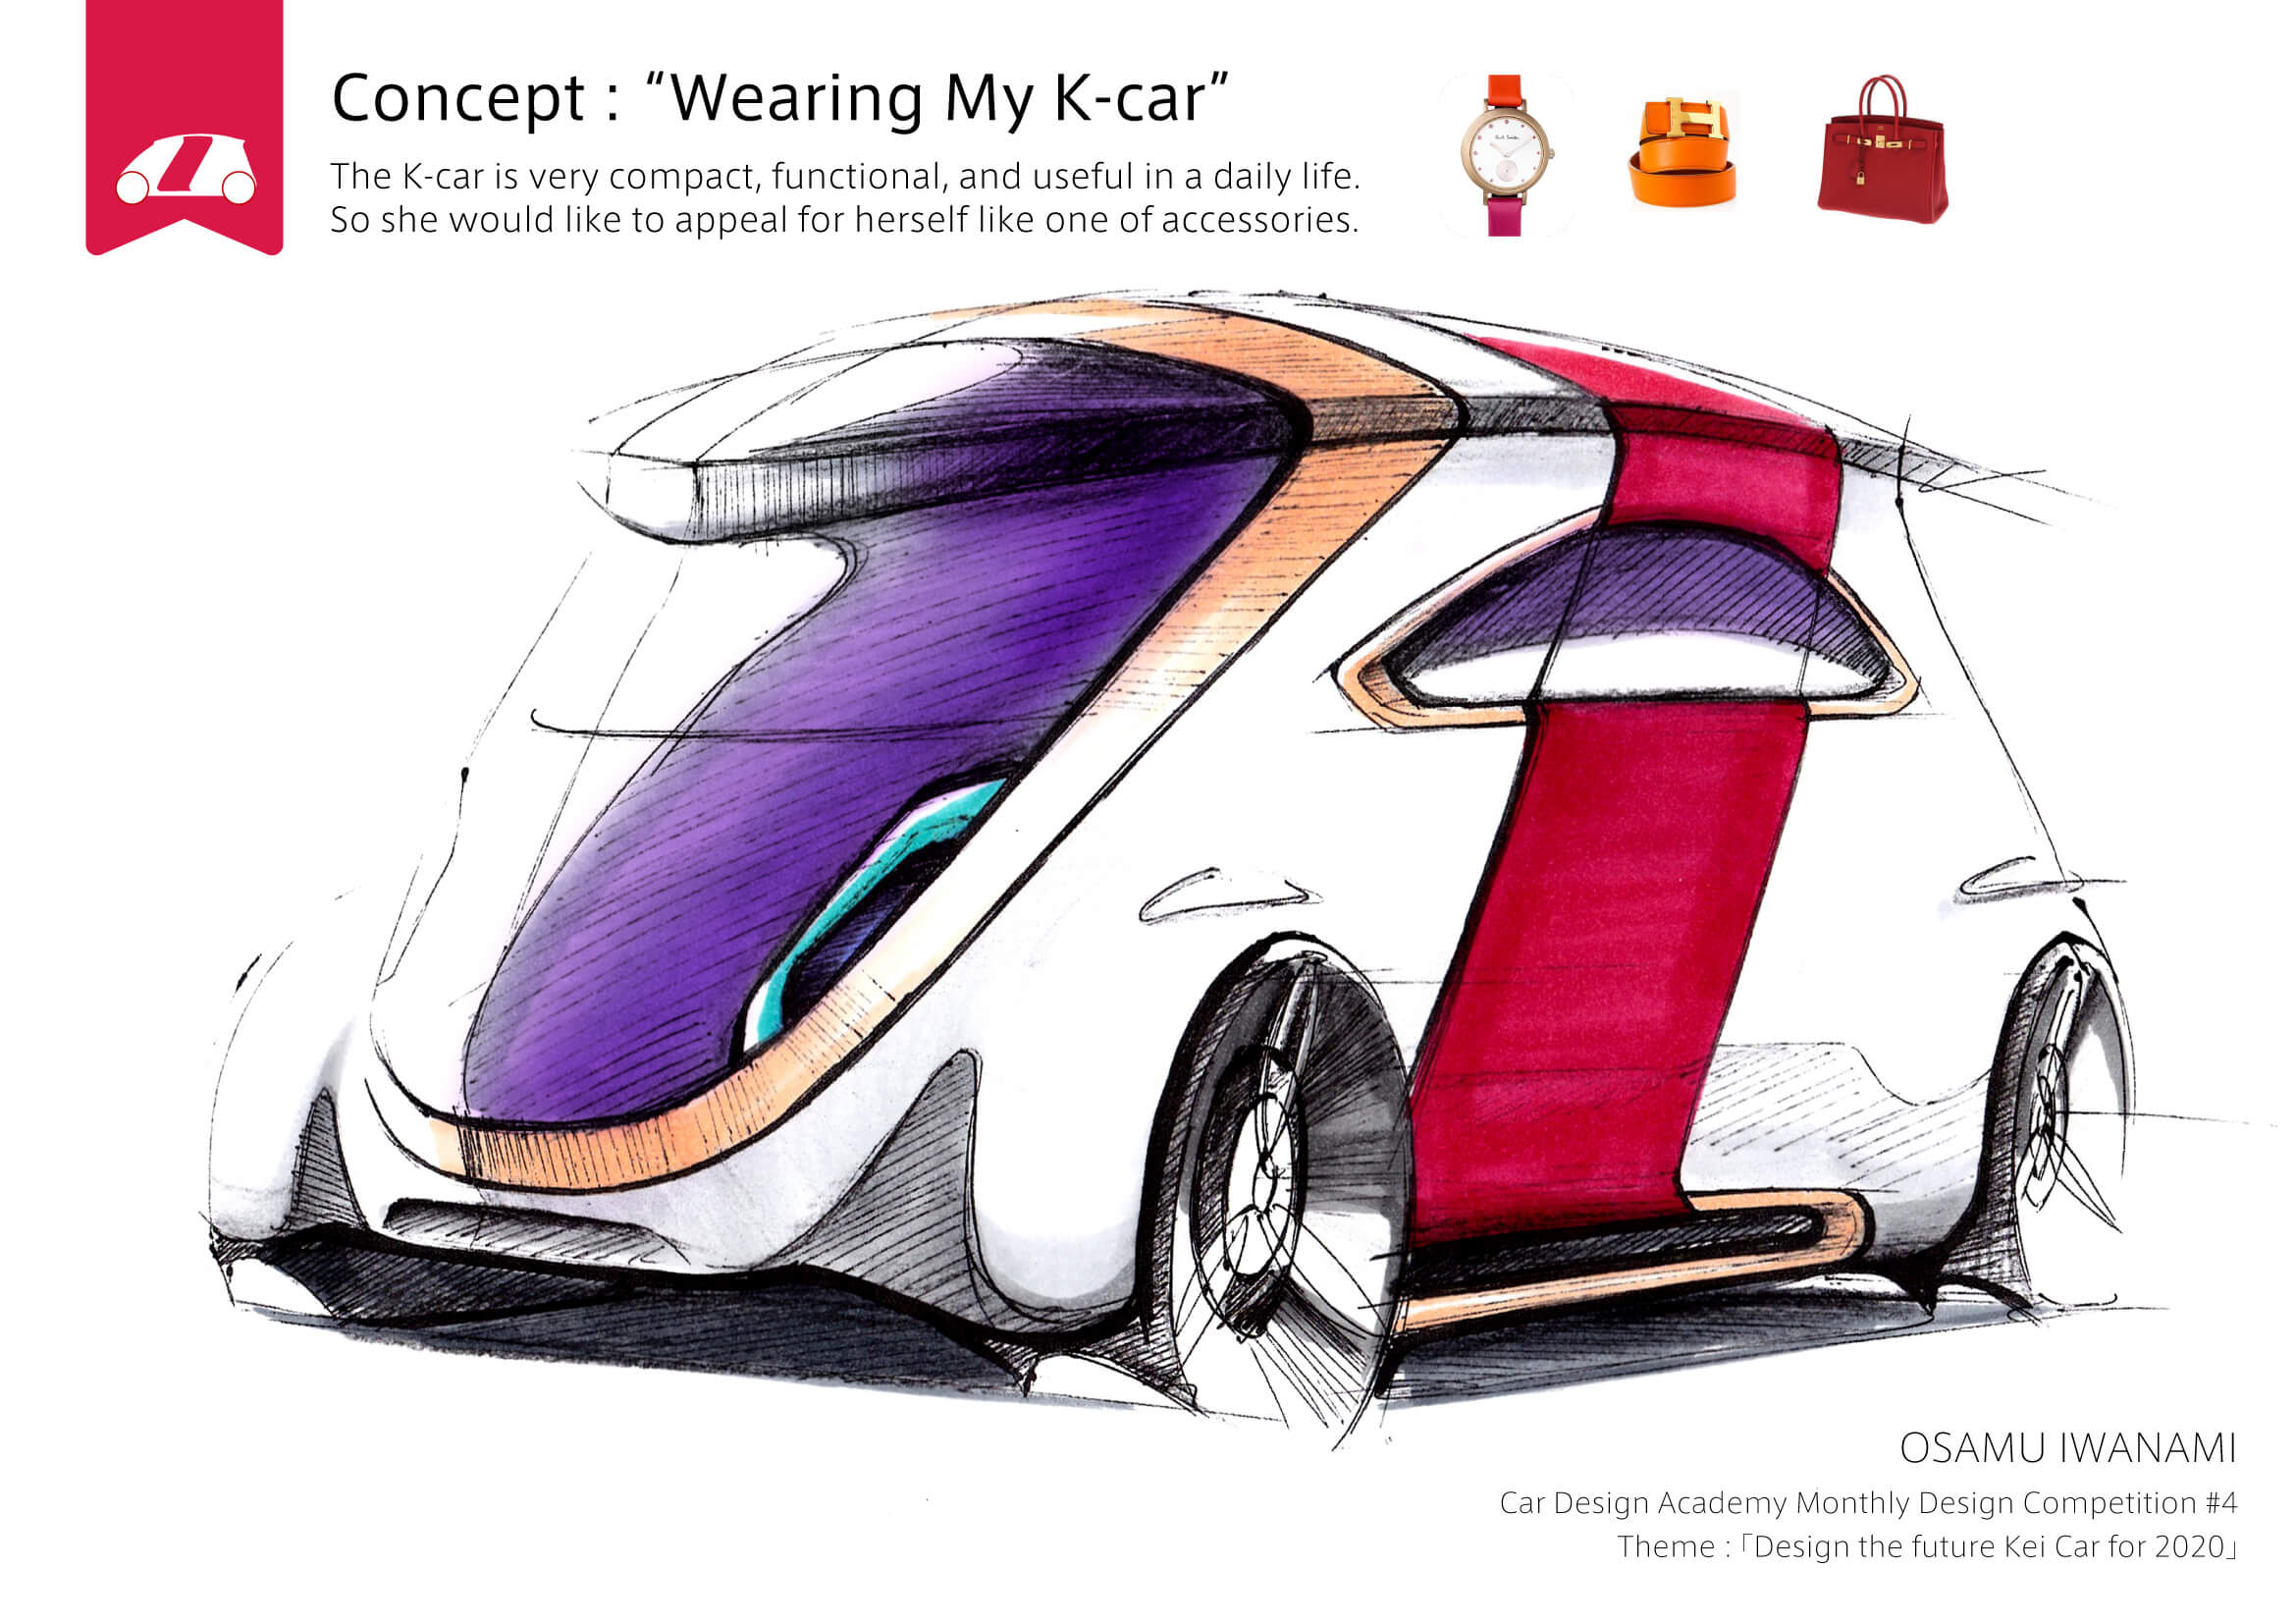 Audi previews upcoming AI:me concept in new sketch - Car Keys